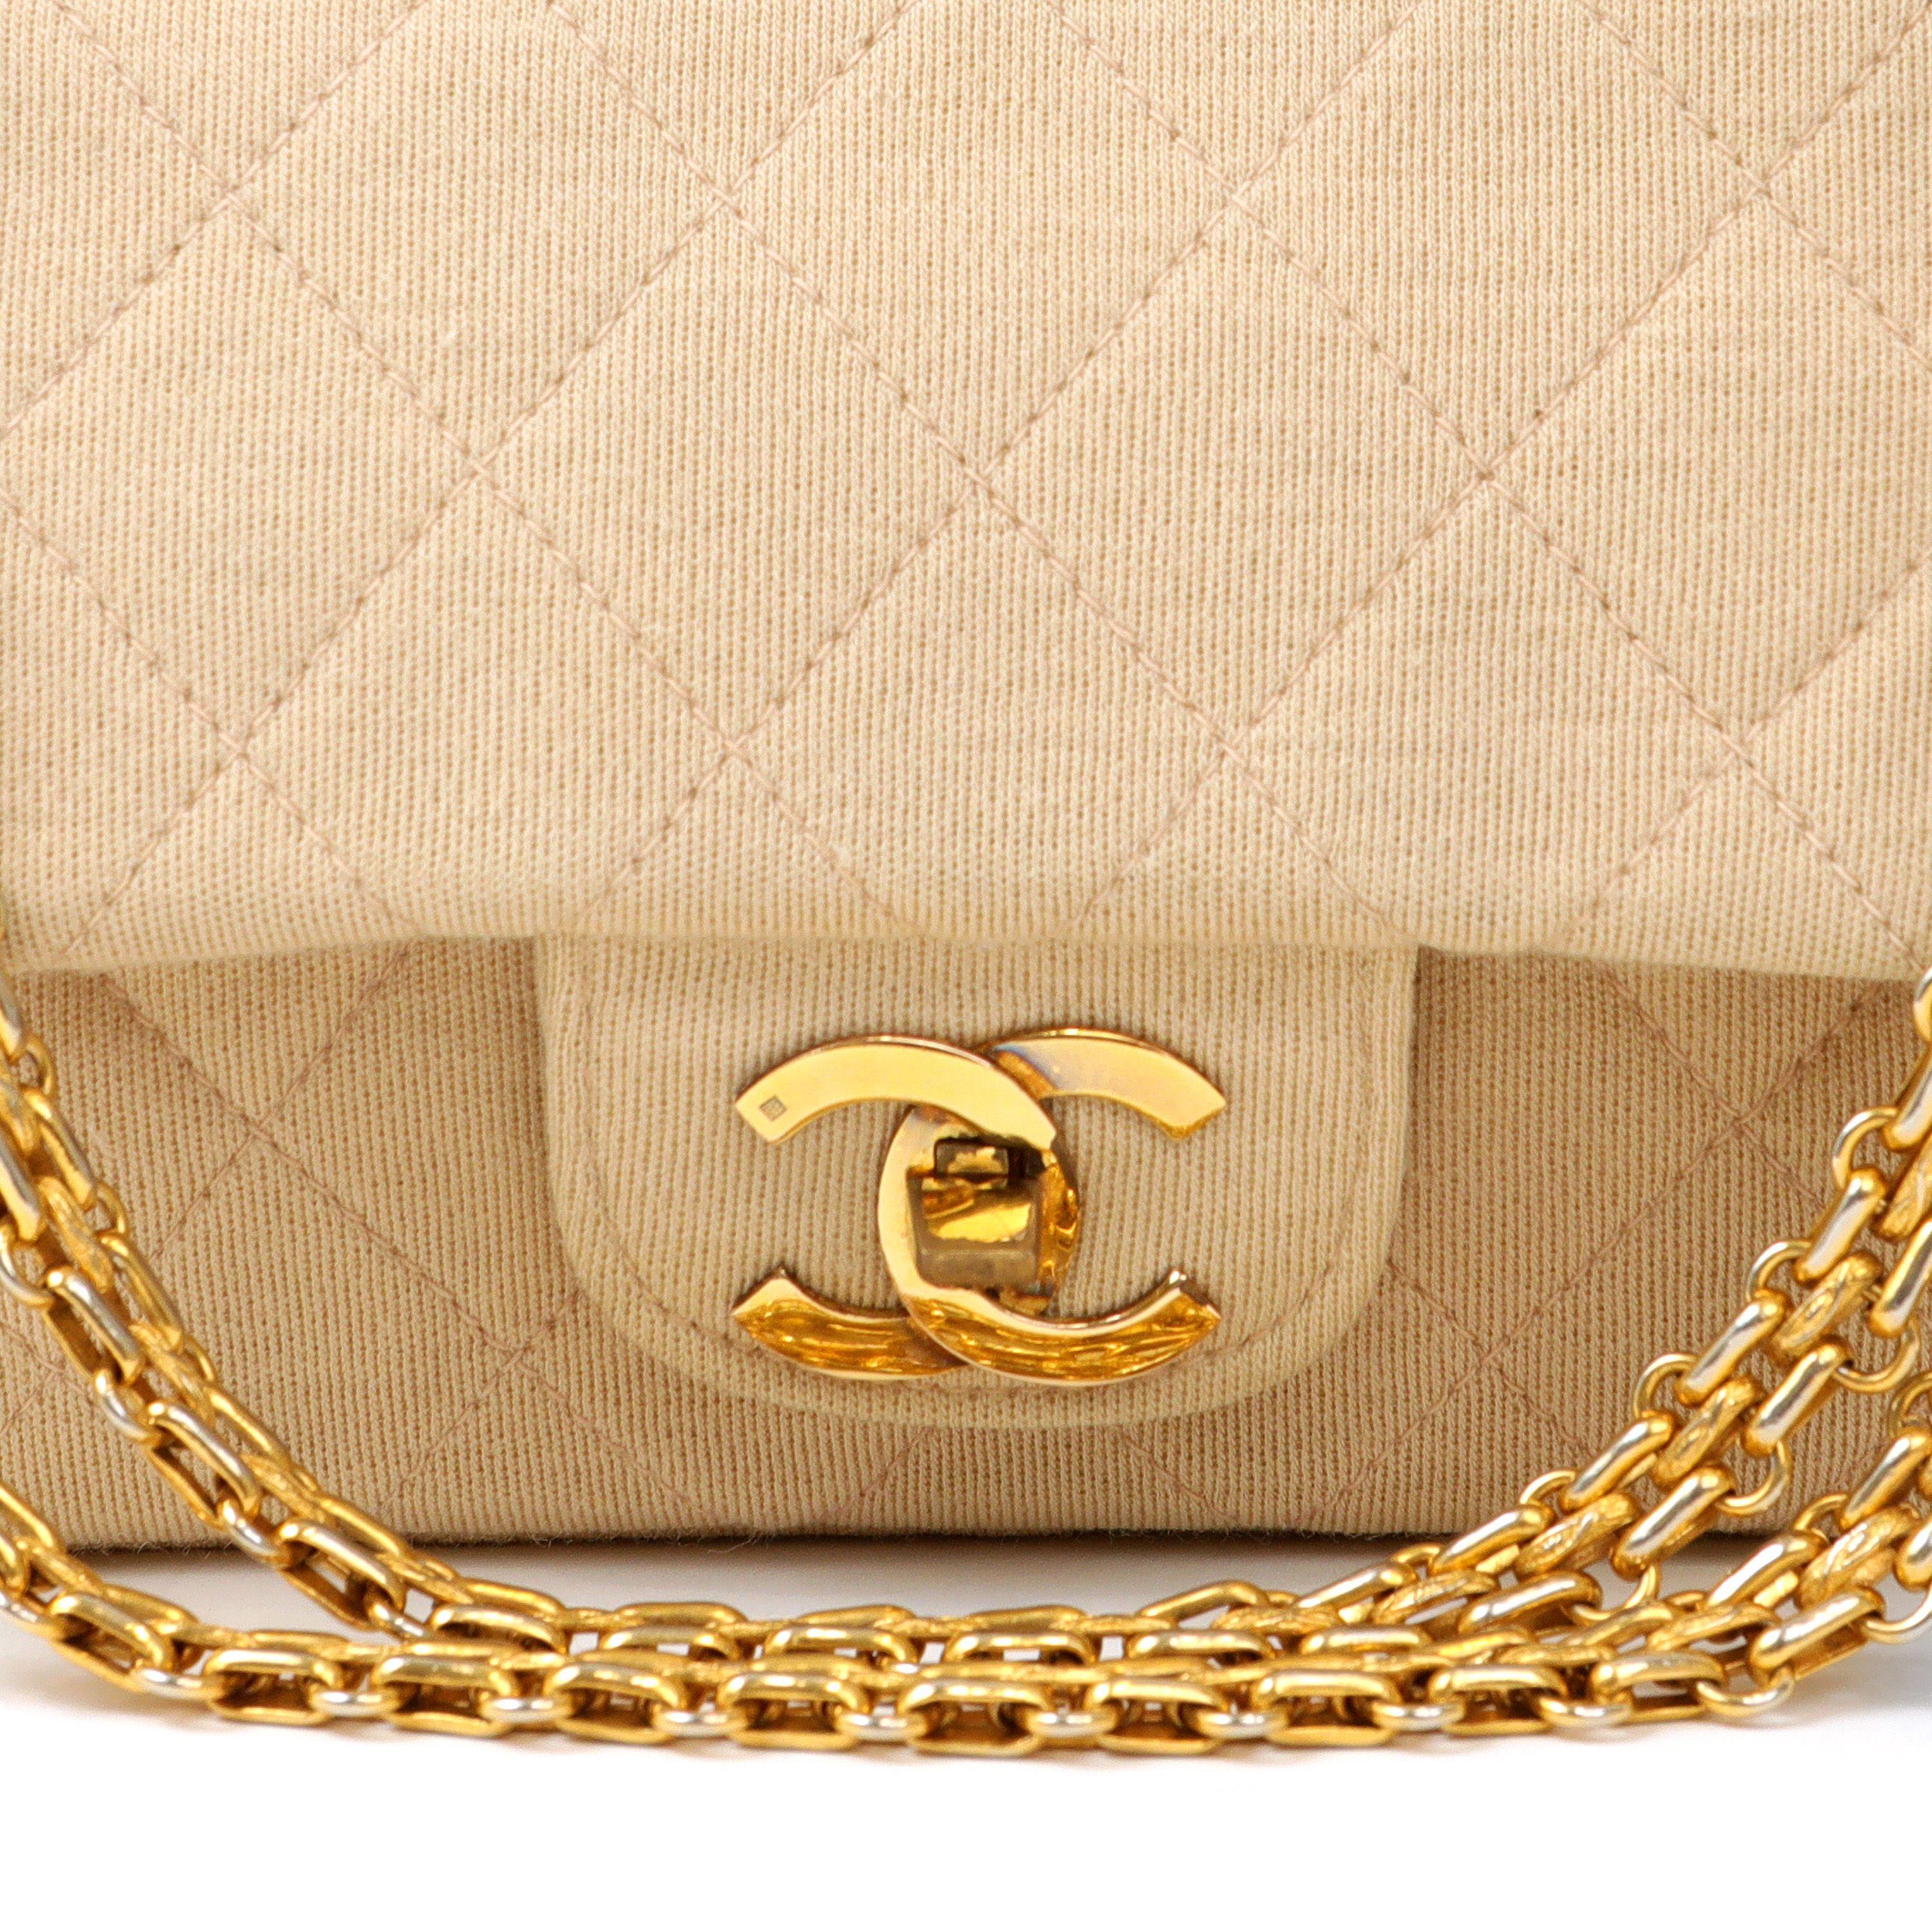 This authentic Chanel Beige Jersey Medium Classic Flap Bag is in excellent vintage condition.  Light tan jersey fabric is quilted in signature Chanel diamond pattern.  Gold tone interlocking CC twist lock clasp and bijoux style chain.   Dust bag